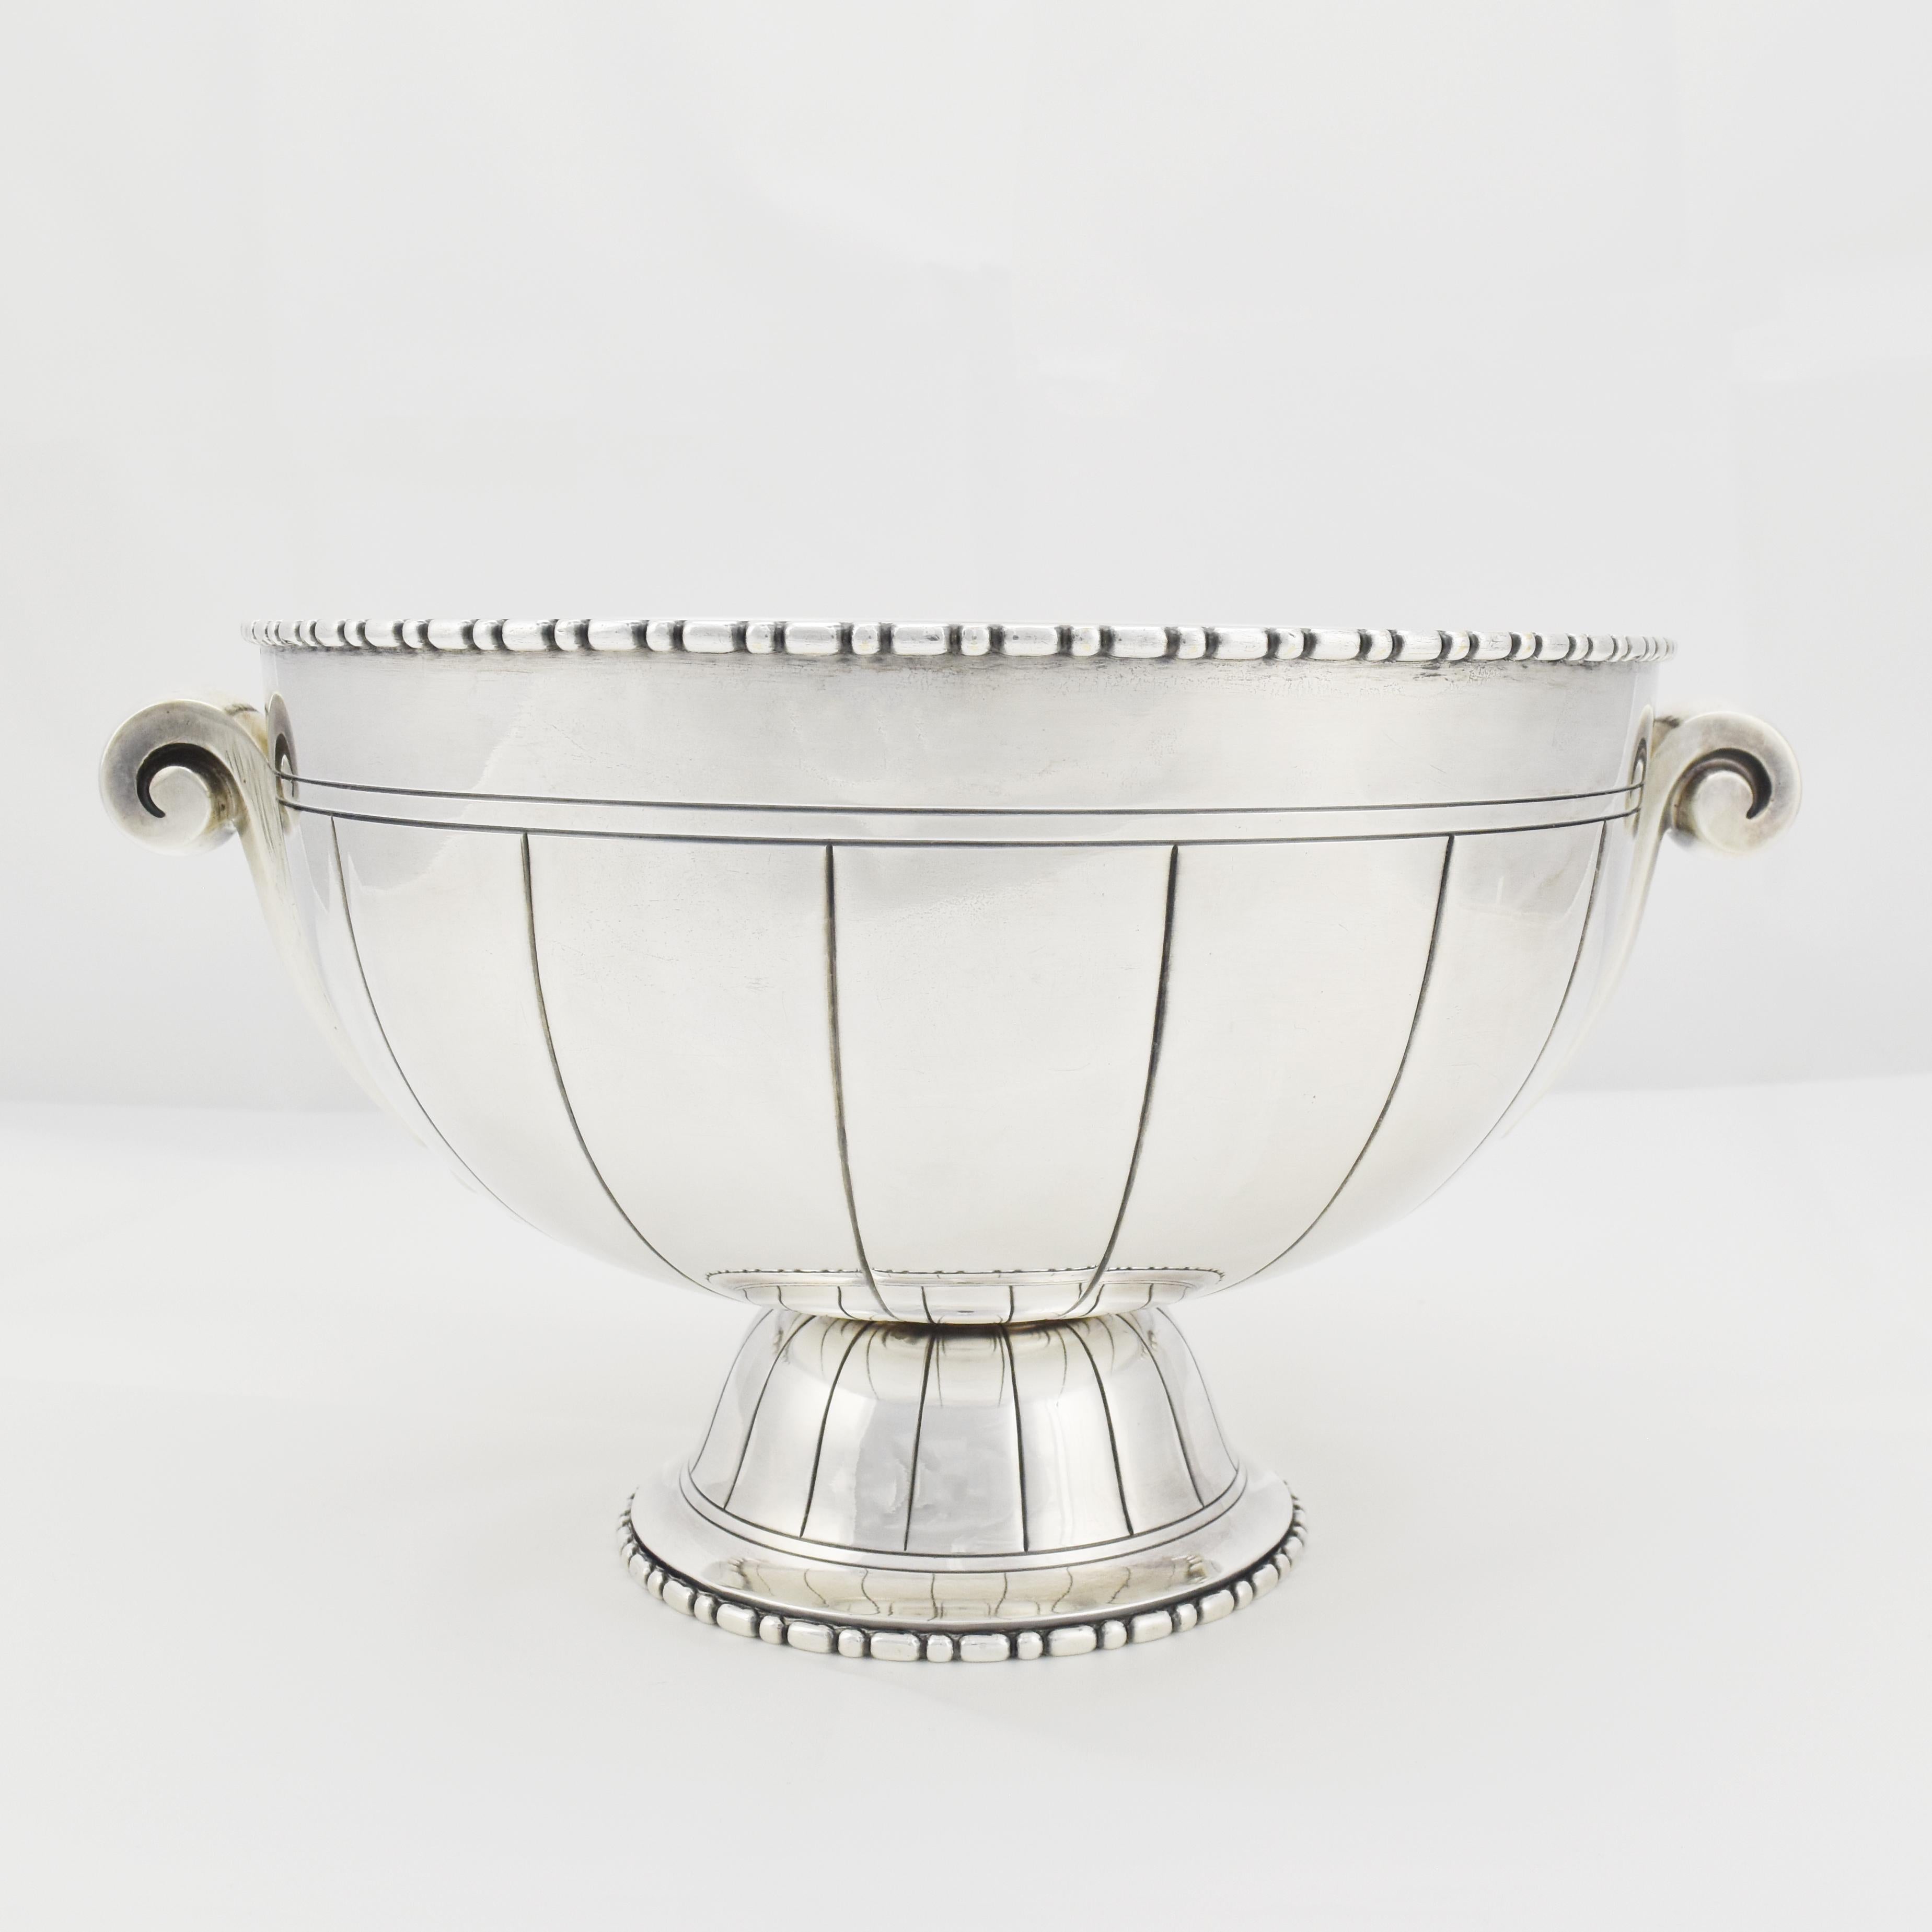 
A beautiful and mostly elegant Art Deco centerpiece bowl made of silverplated brass by the well-known French manufacturer Bouillet & Bourdelle  in the 1920s.

Its medium size is perfect to display flower bouquets on any smaller table or in your